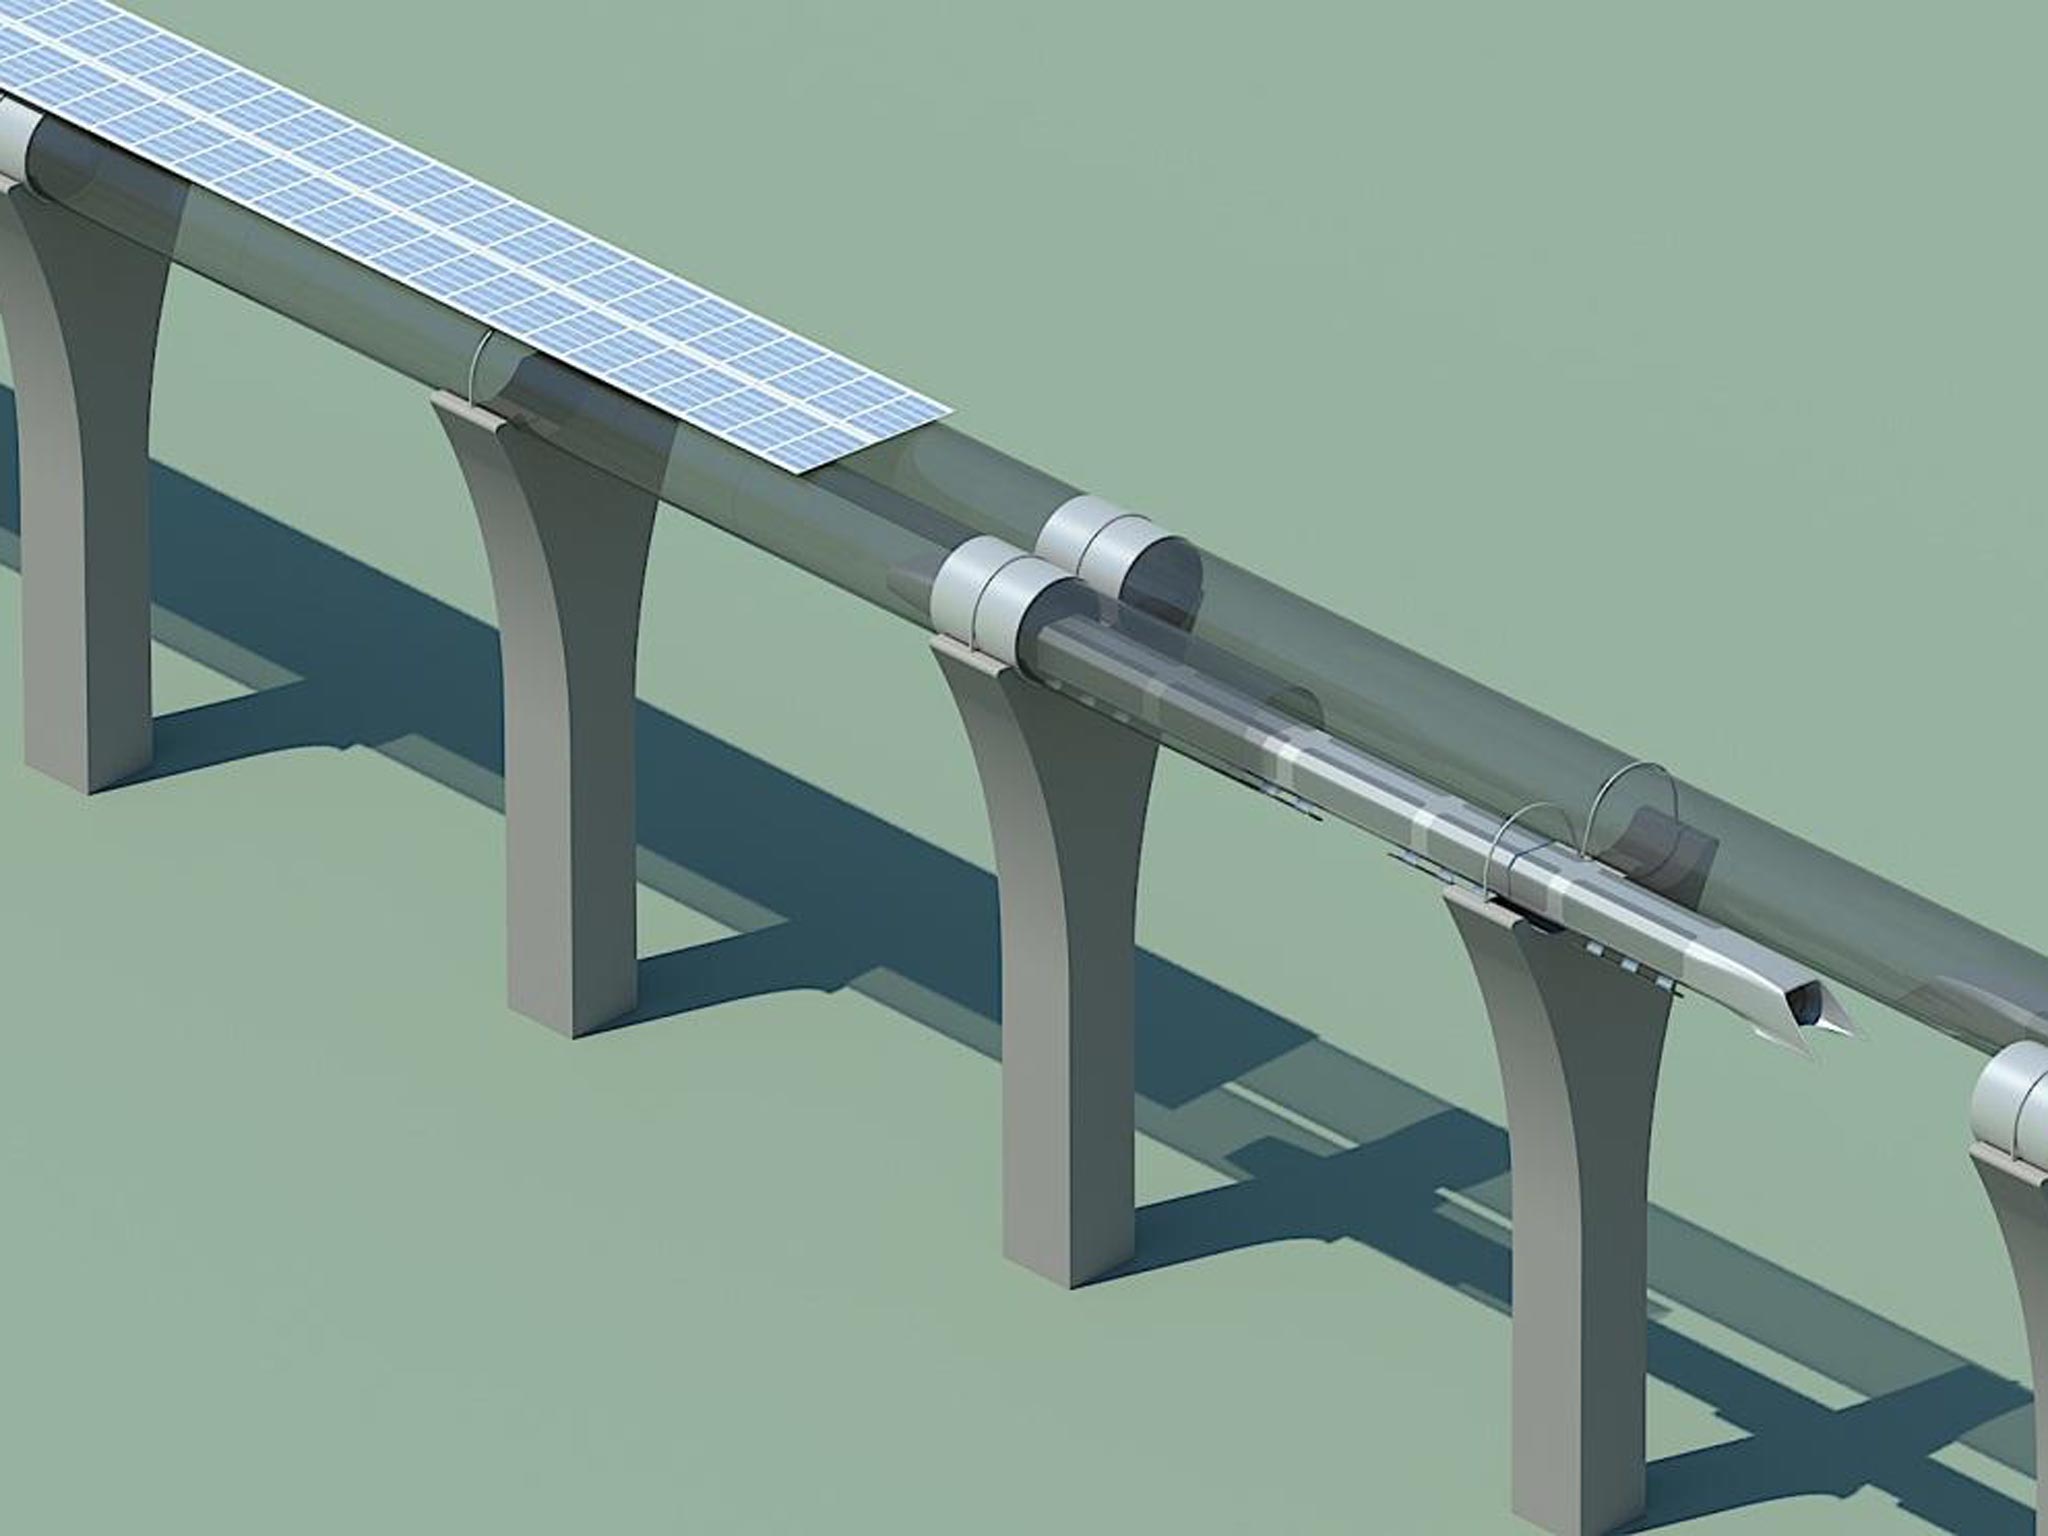 Hyperloop capsule in tube cutaway with attached solar arrays